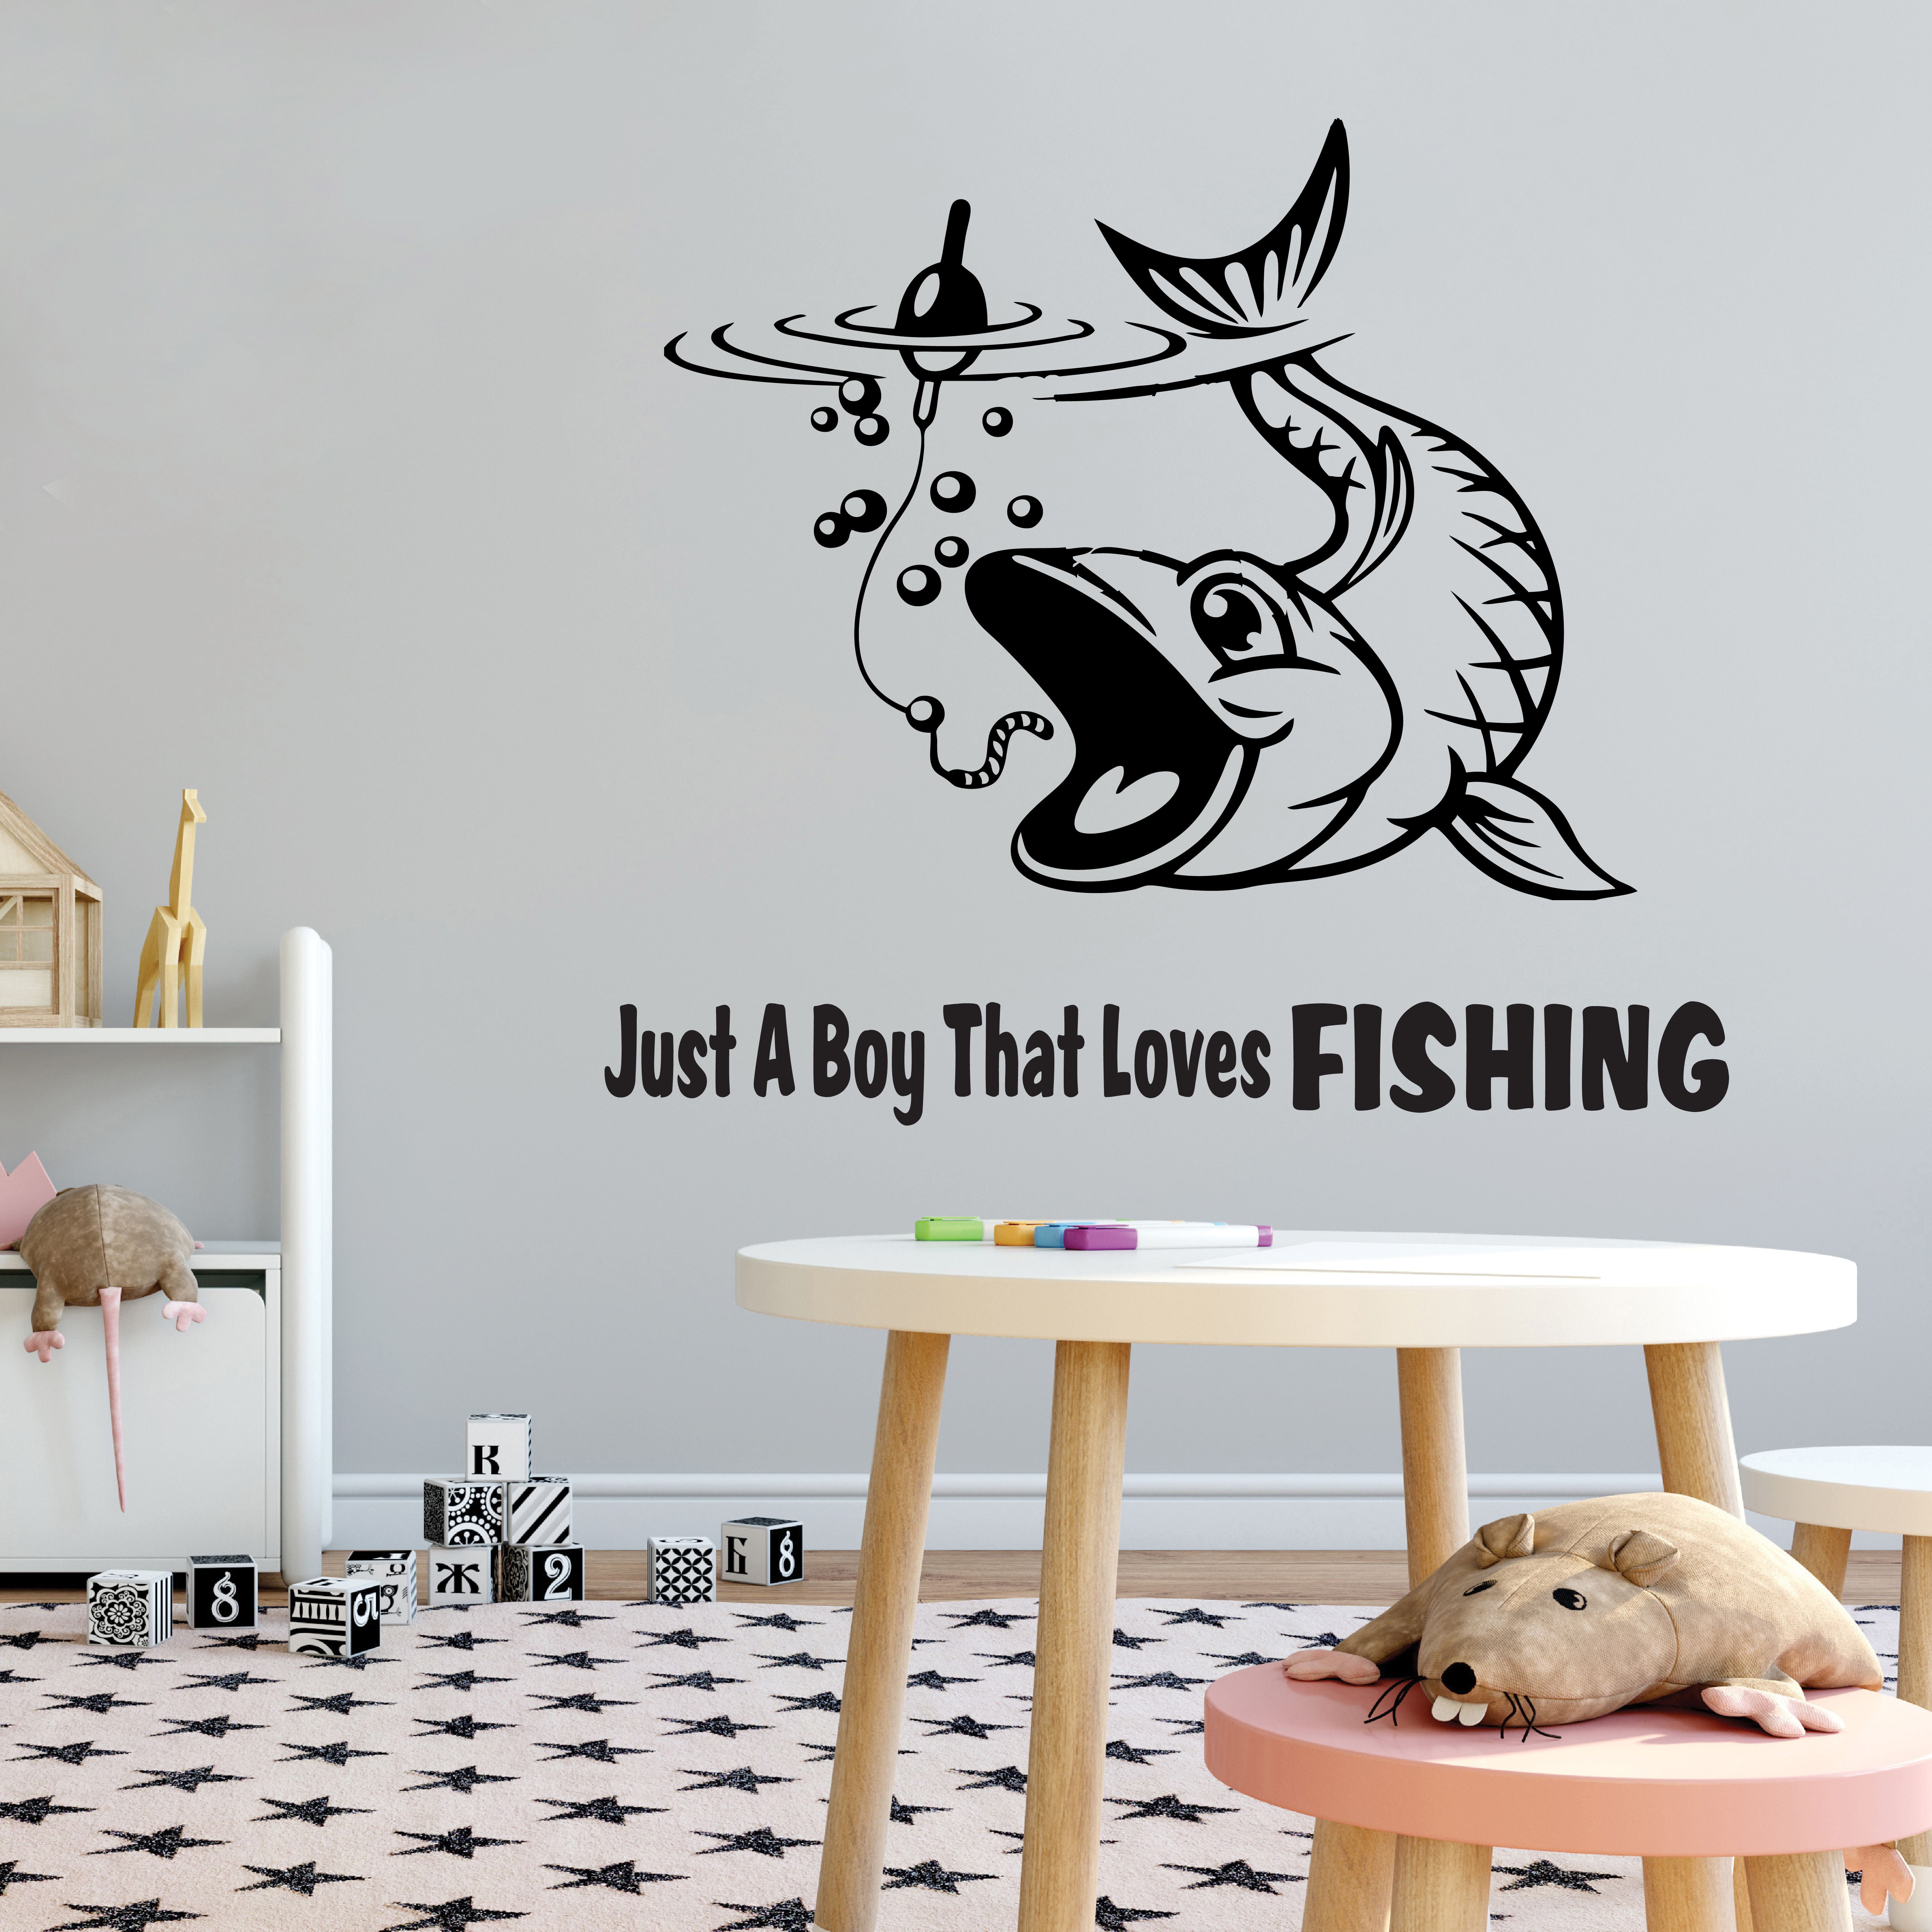 Wall Decals IF I'm Missing I've Gone Fishing Removable Wall Stickers  Inspirational Quotes DIY Wall Art Decor for Home Bedroom Living Room